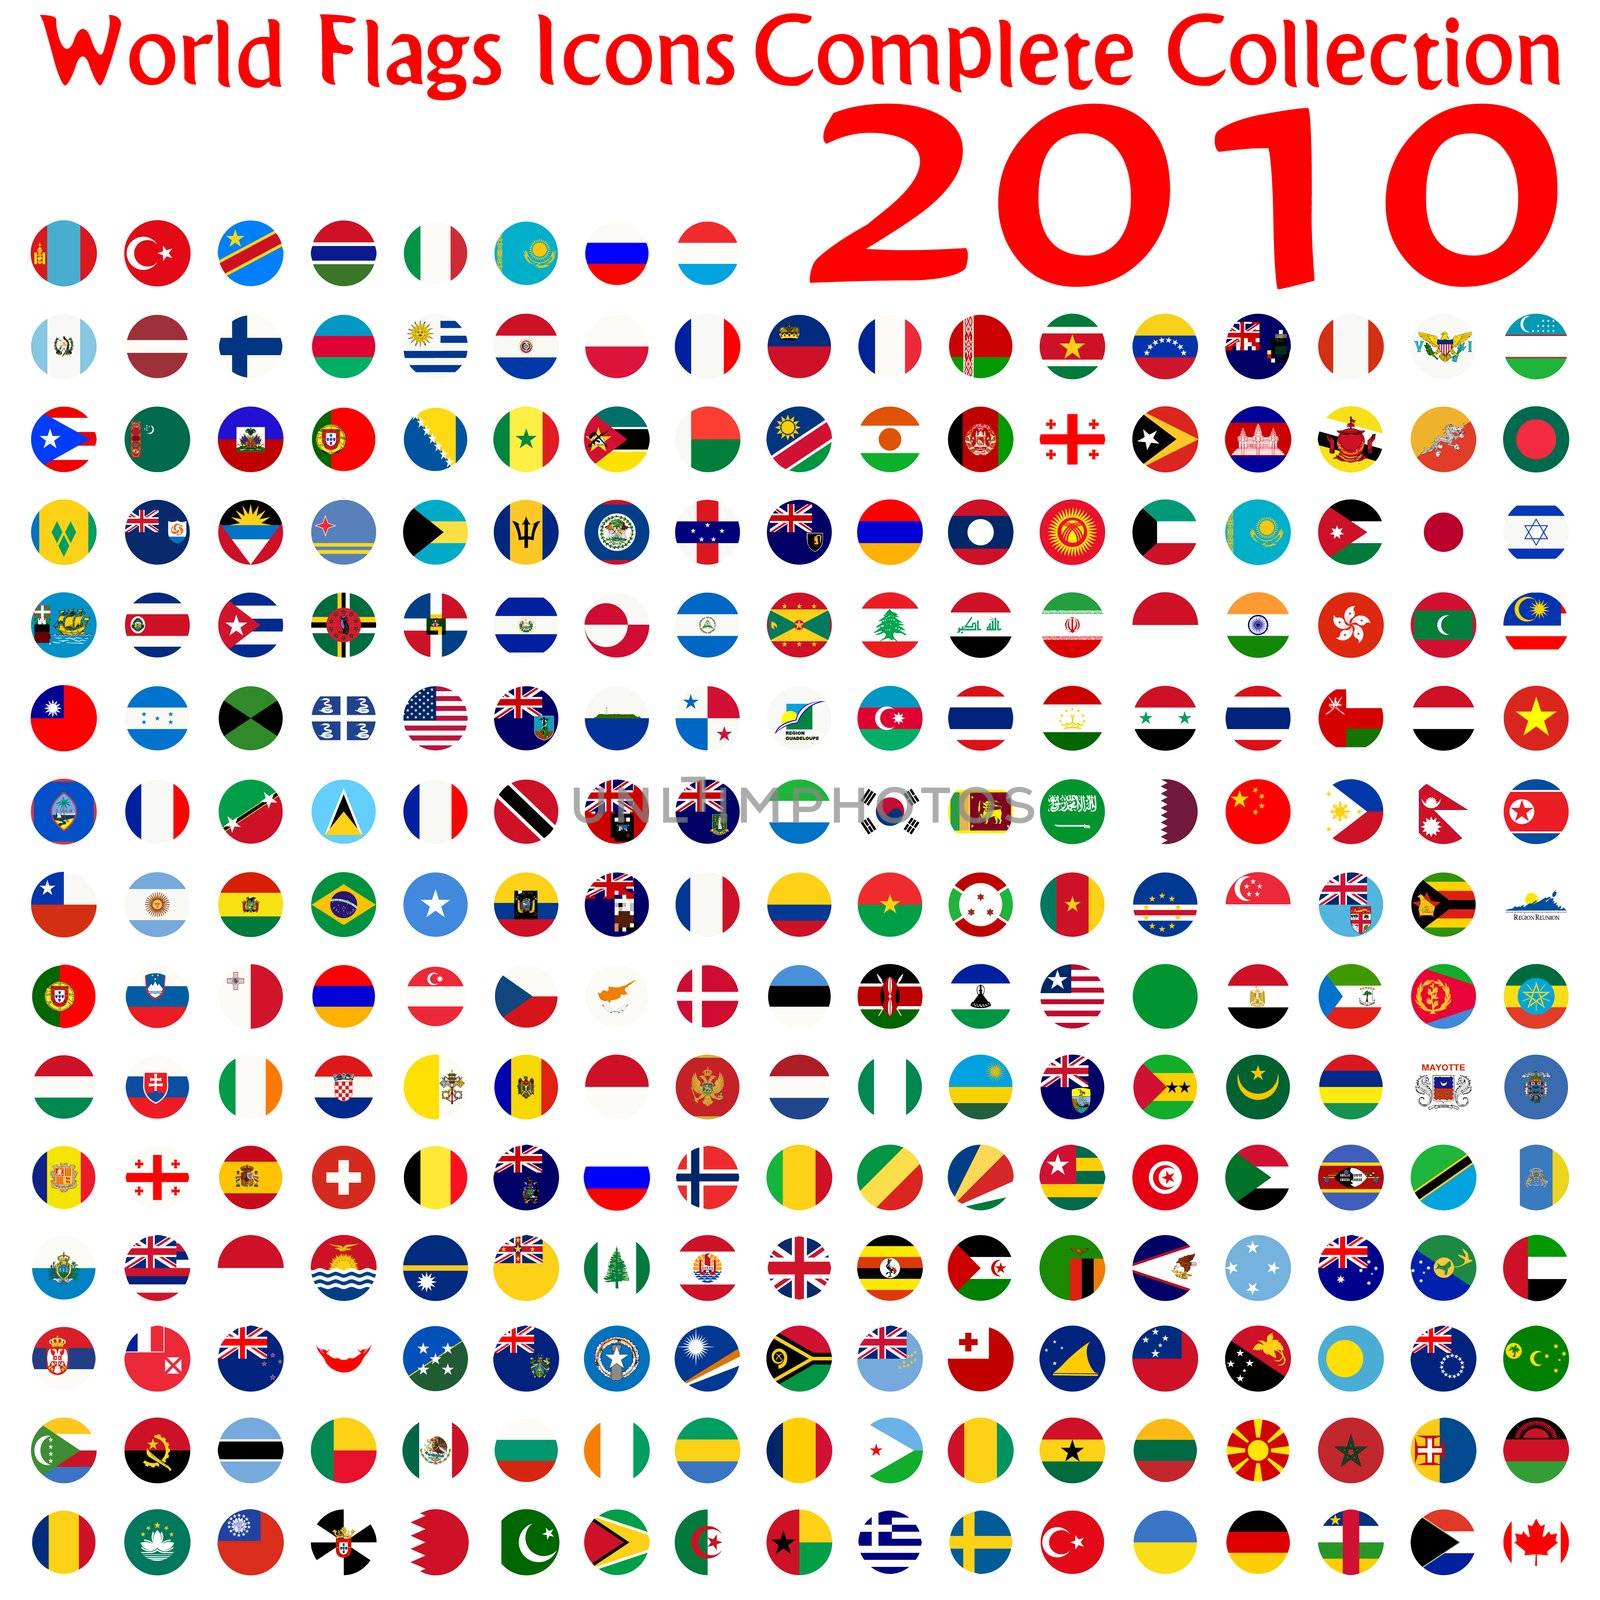 world flags icons collection by robertosch